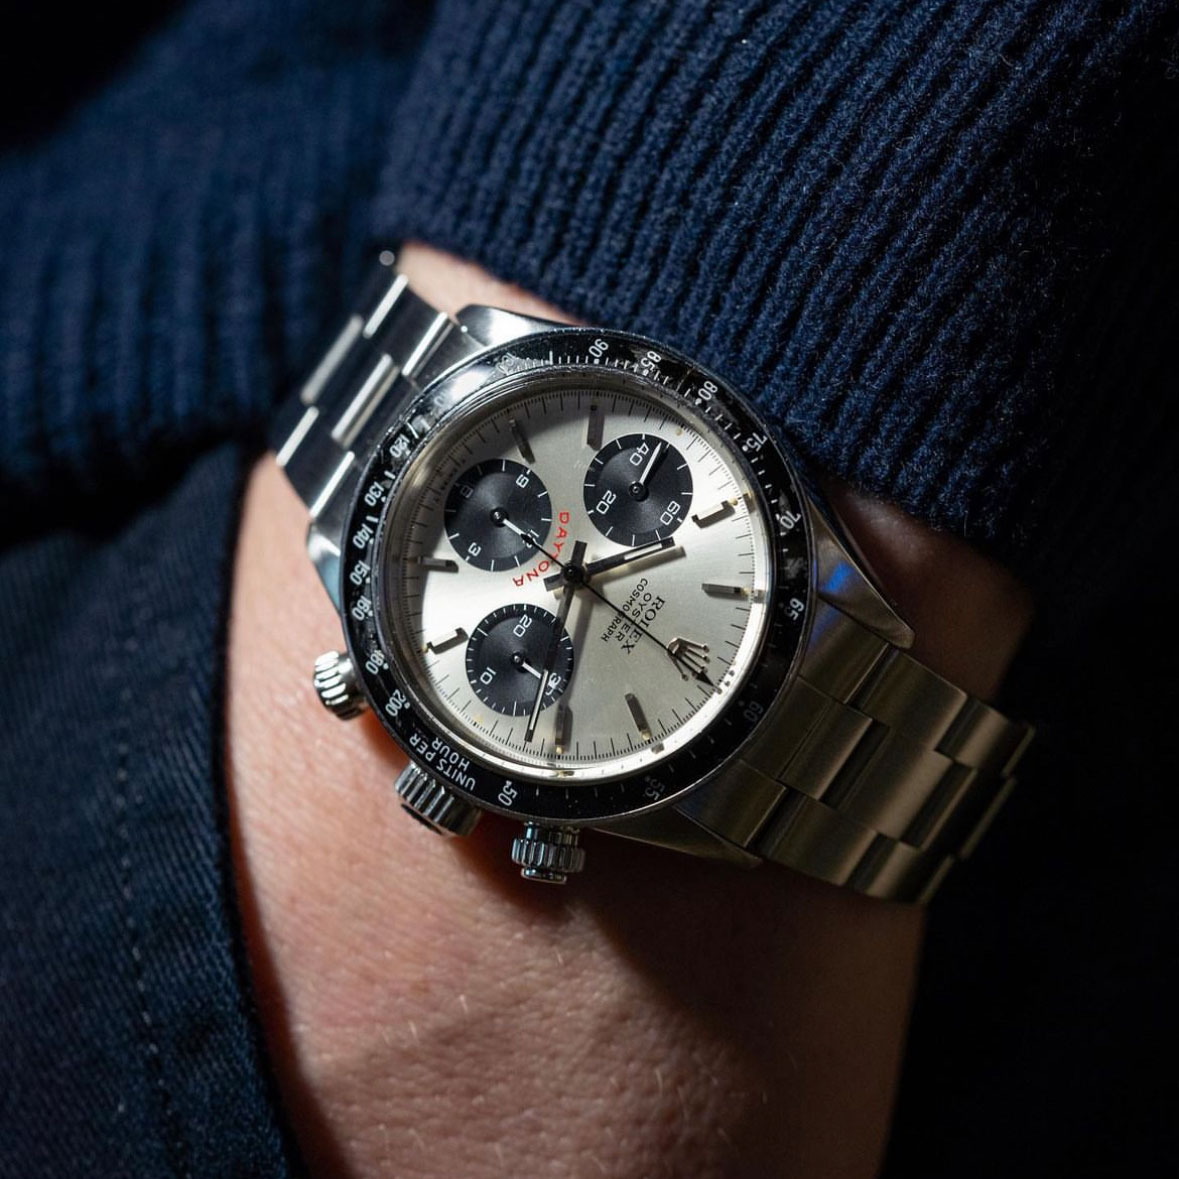 Luxury watch buying advice from expert collectors.